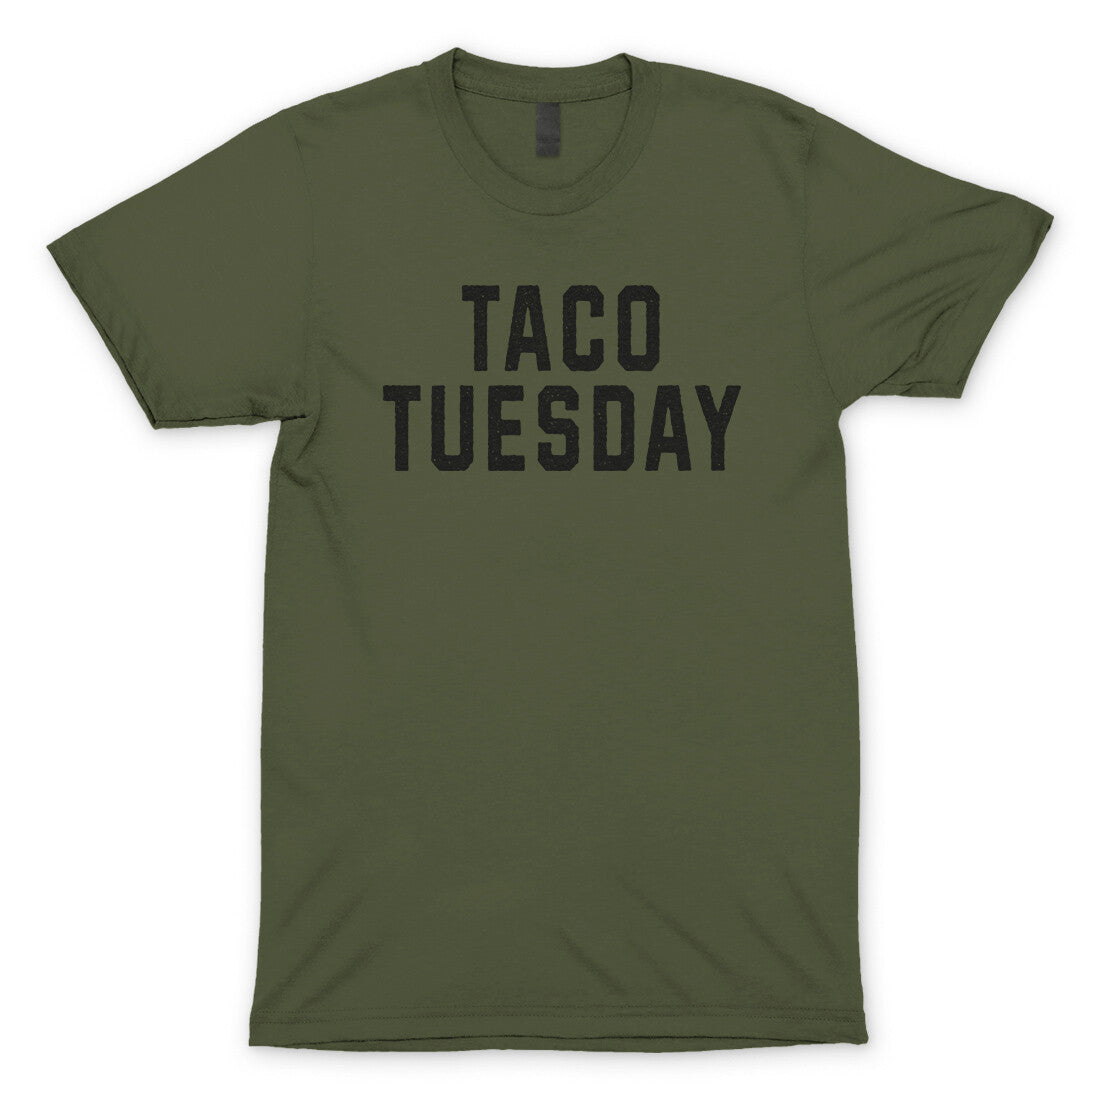 Taco Tuesday in Military Green Color